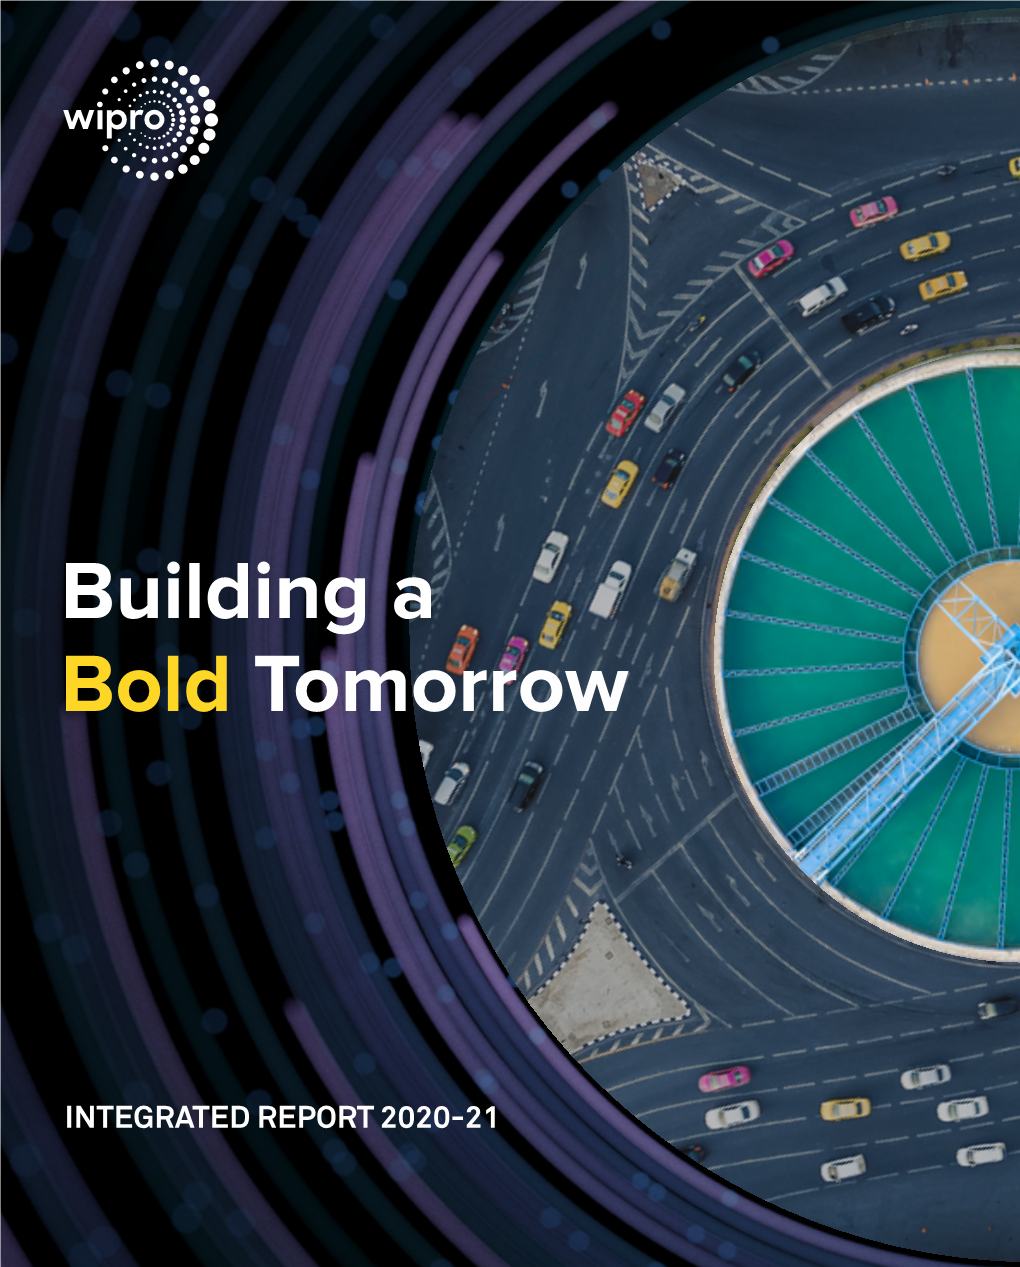 Integrated Annual Report 2020-21